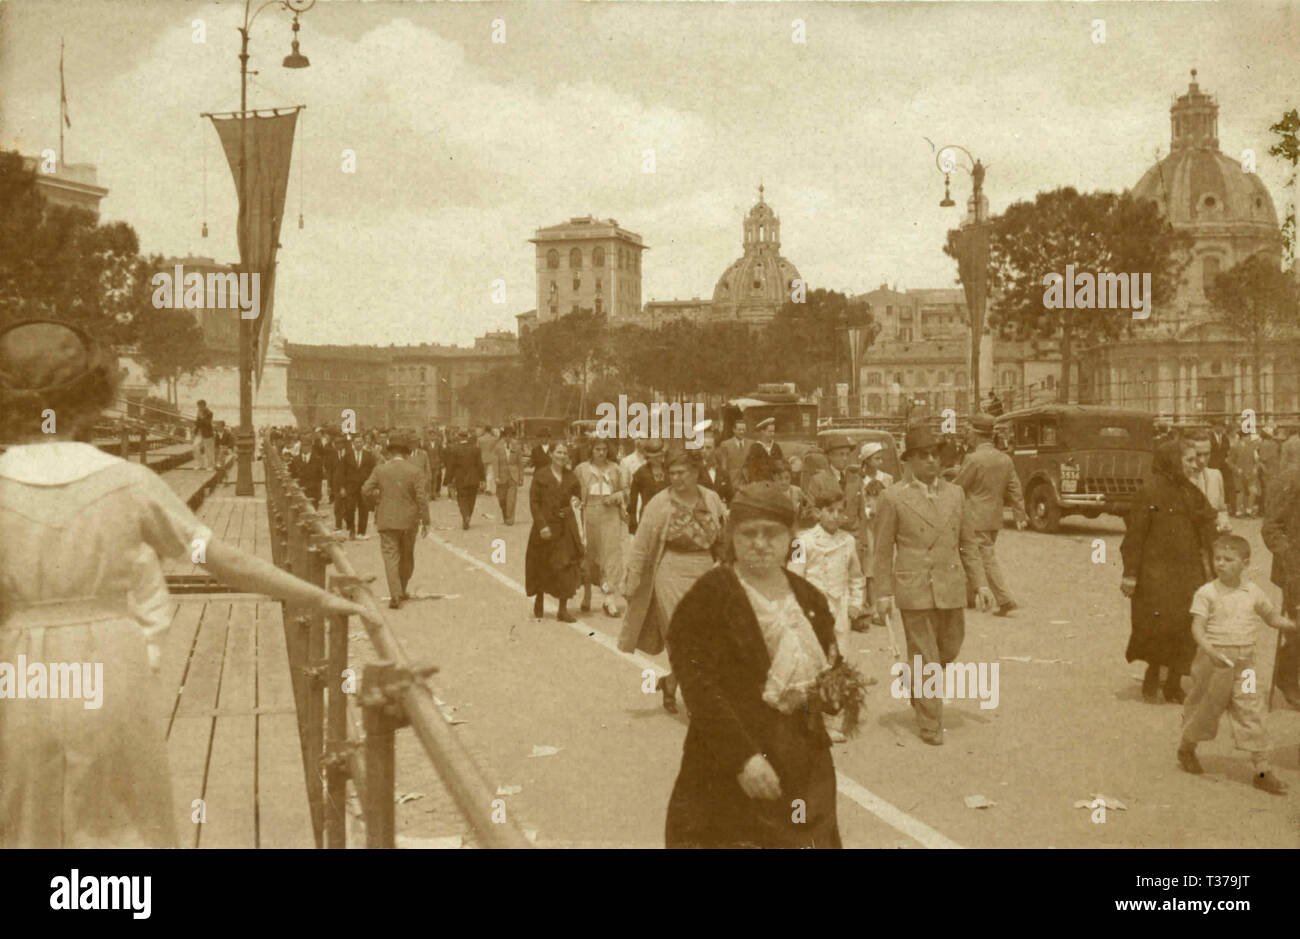 People at Via dei Fori Imperiali for the national day, Rome, Italy 1920s Stock Photo